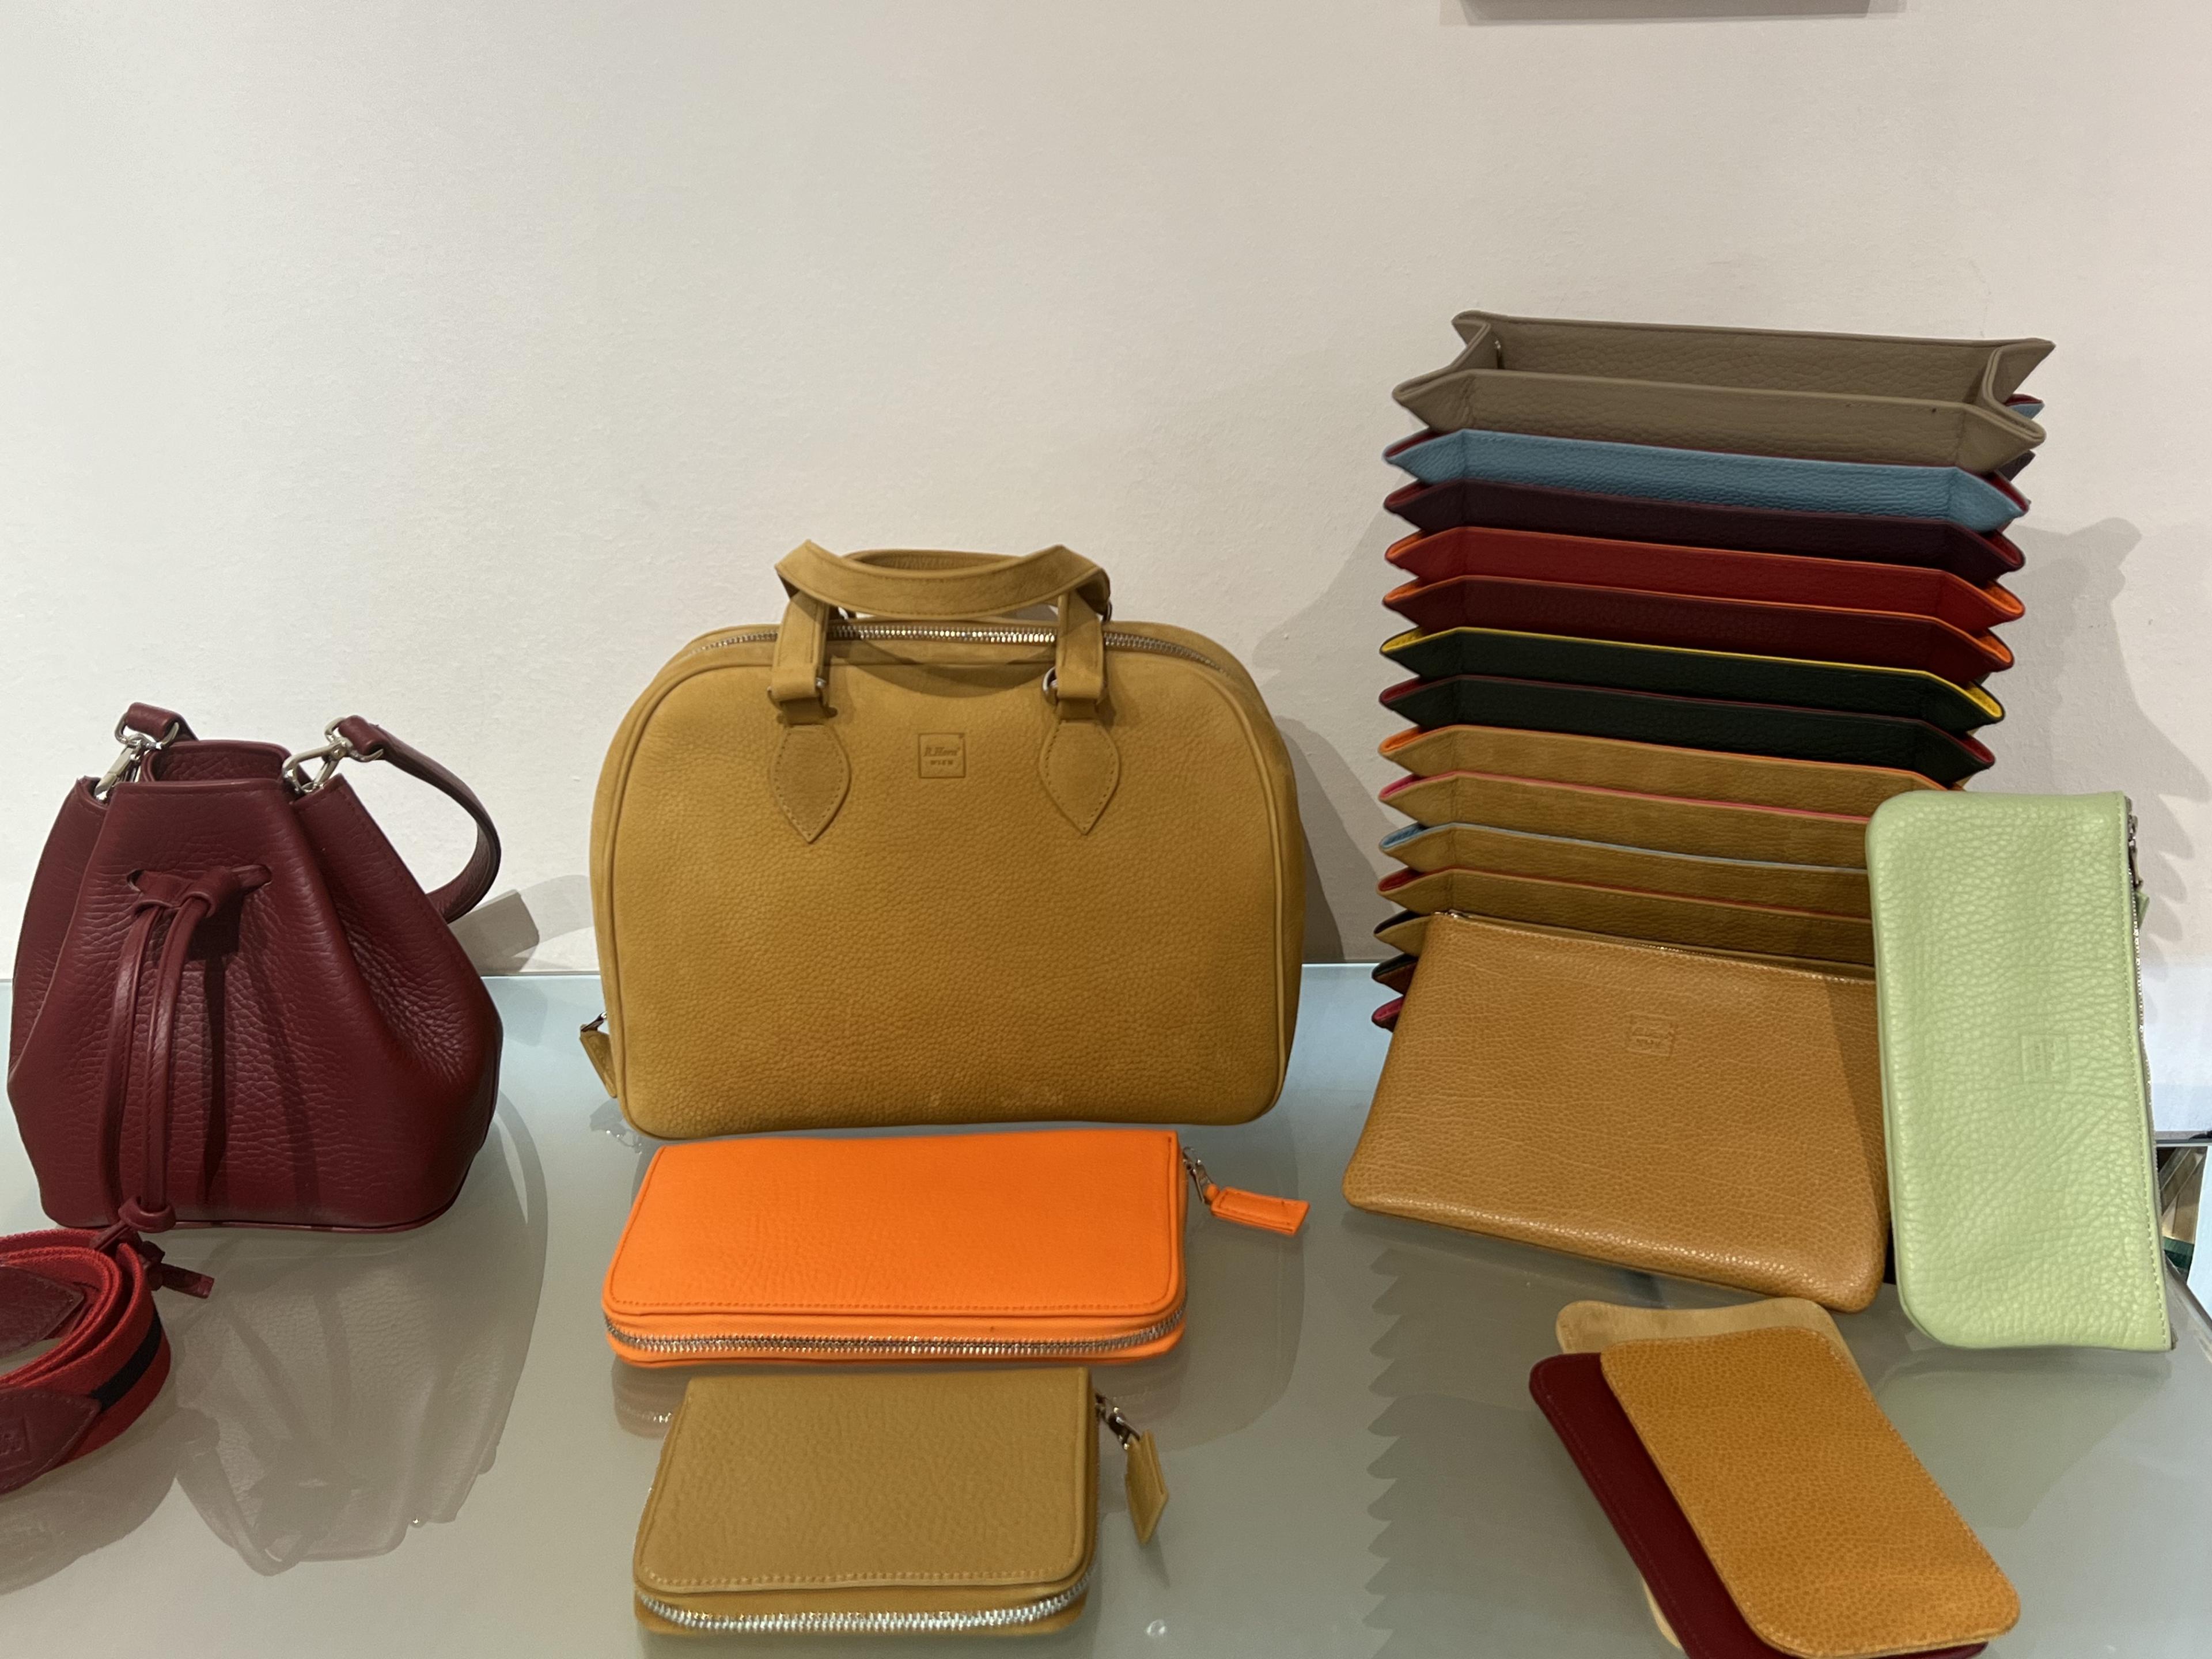 leather trays and clutch purses in multiple colors in a store